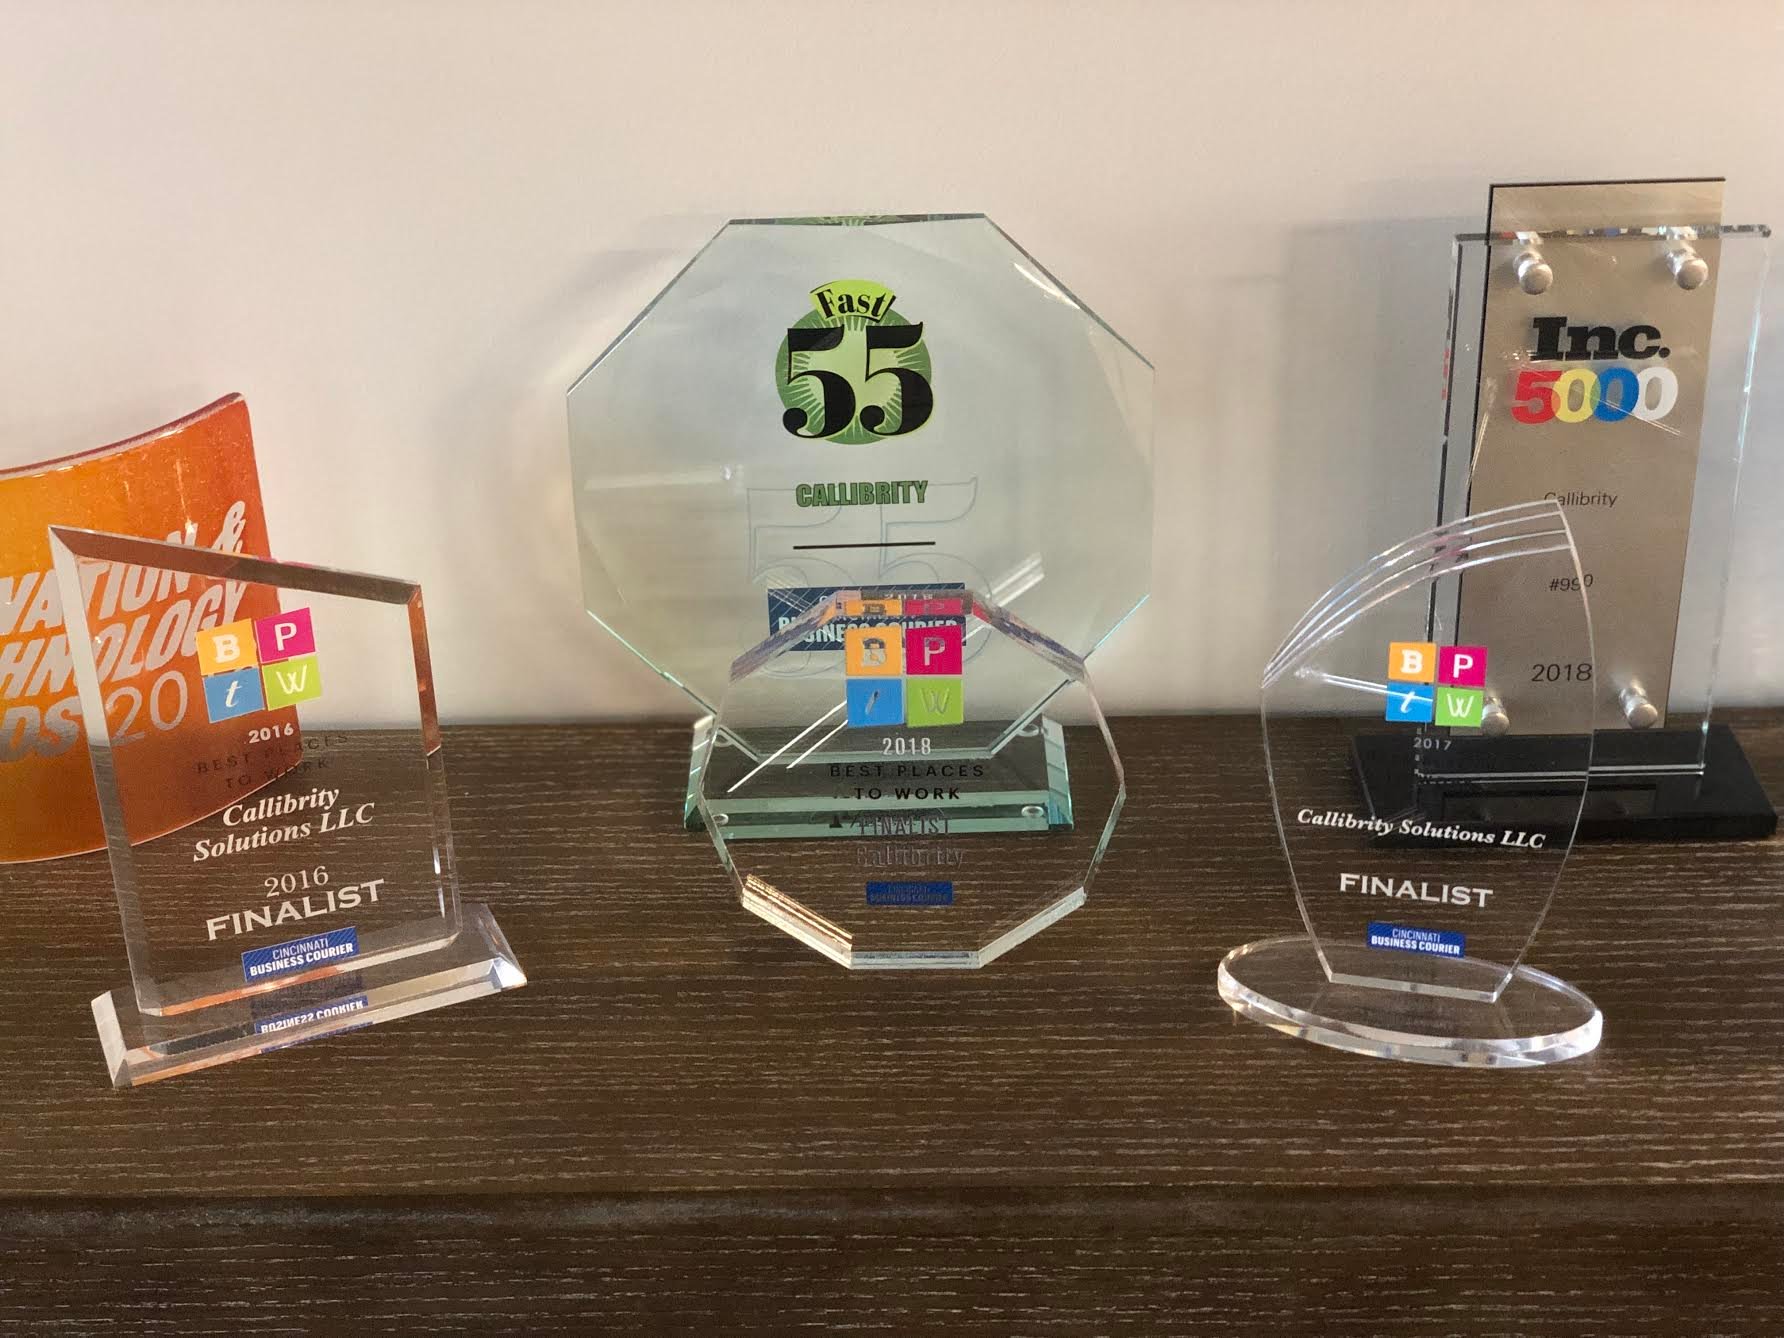 A collection of awards and accolades earned by Callibrity, including: Best Places to Work Finalist in 2016, 2017, and 2018; Fast 55; and Inc. 5000, 2018, placing at #950